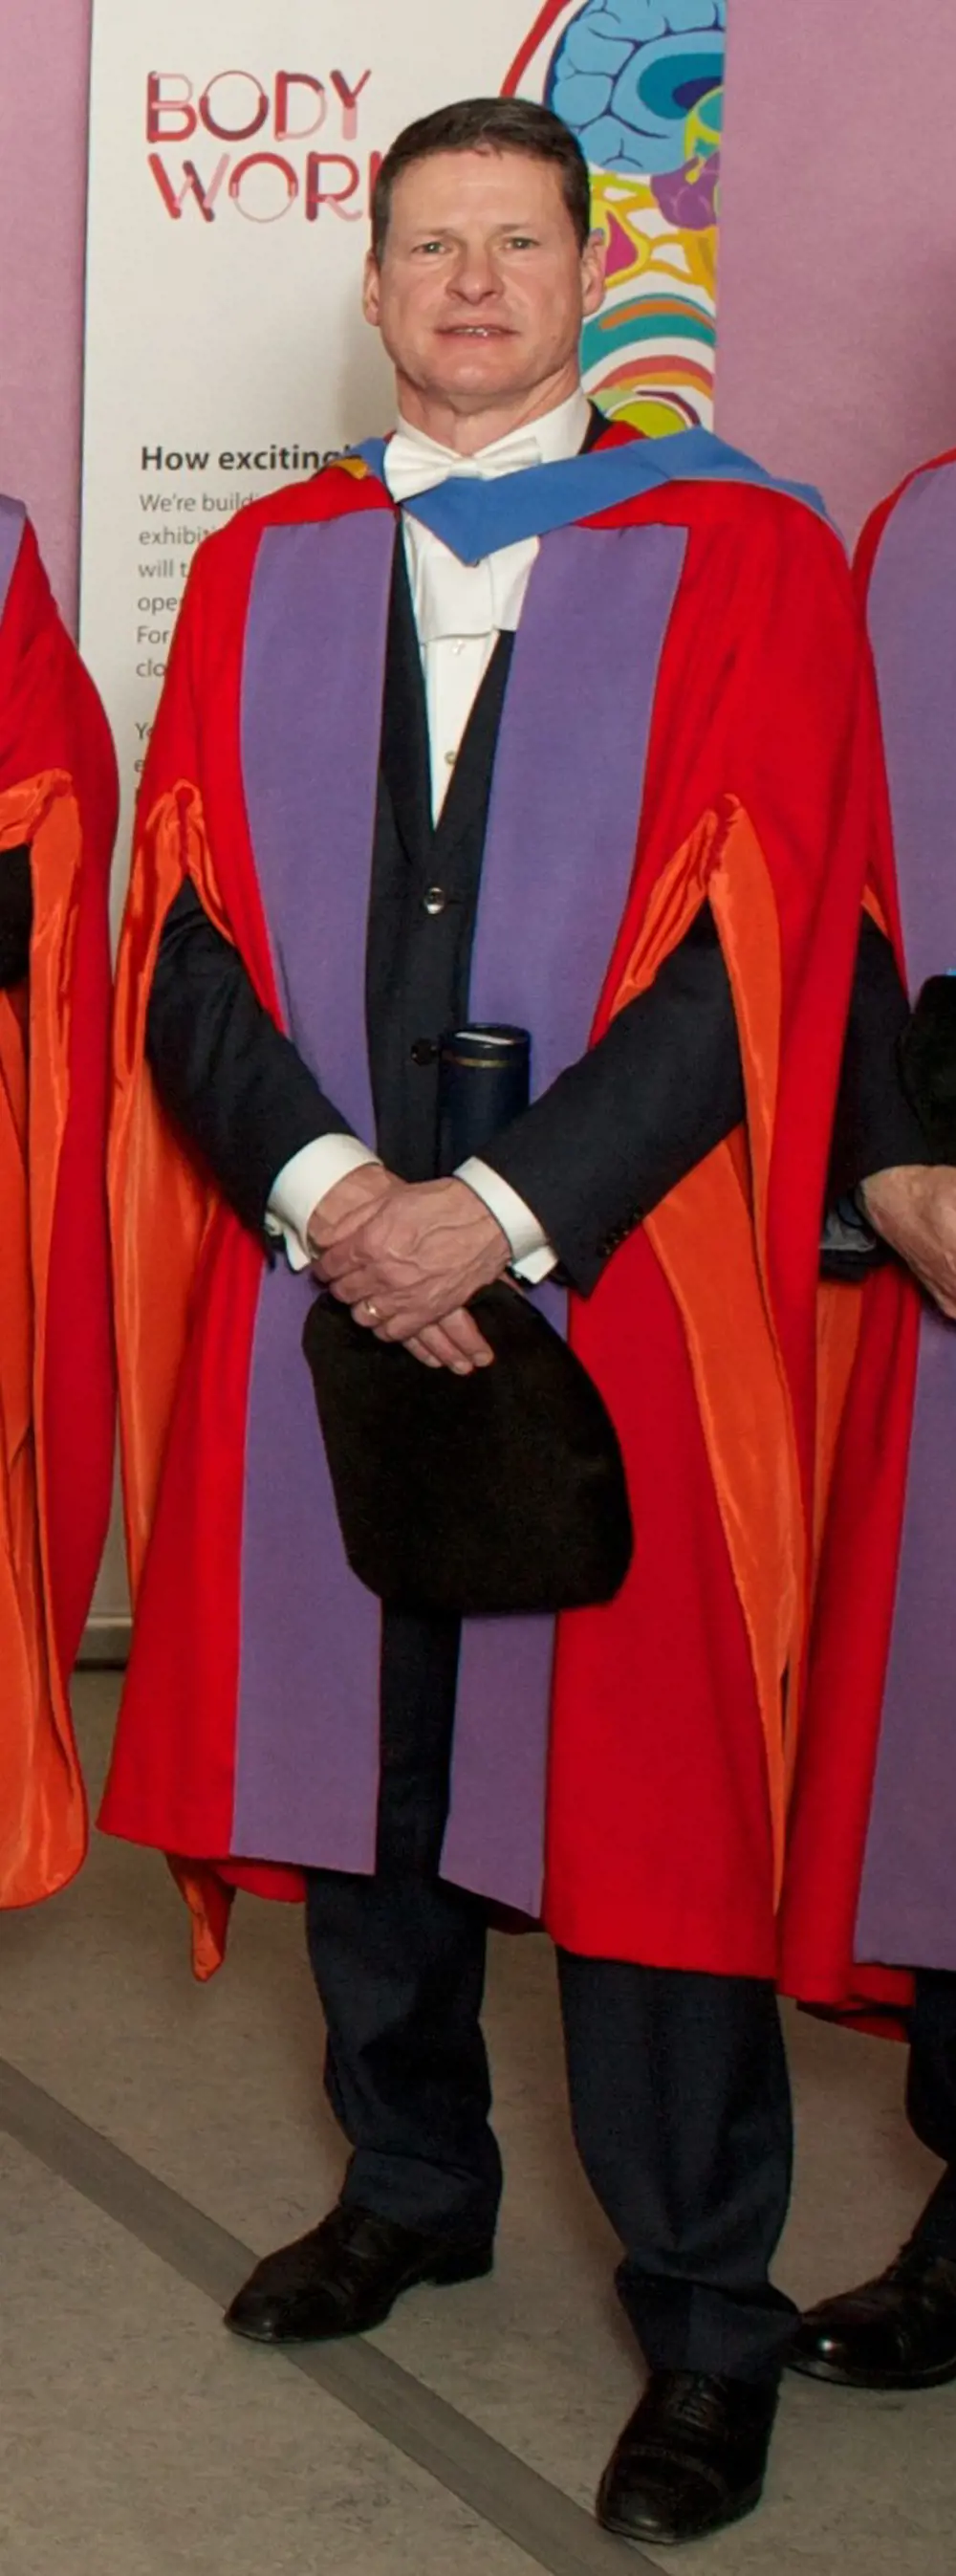 Steve Holliday in robes at the University of Strathclyde.